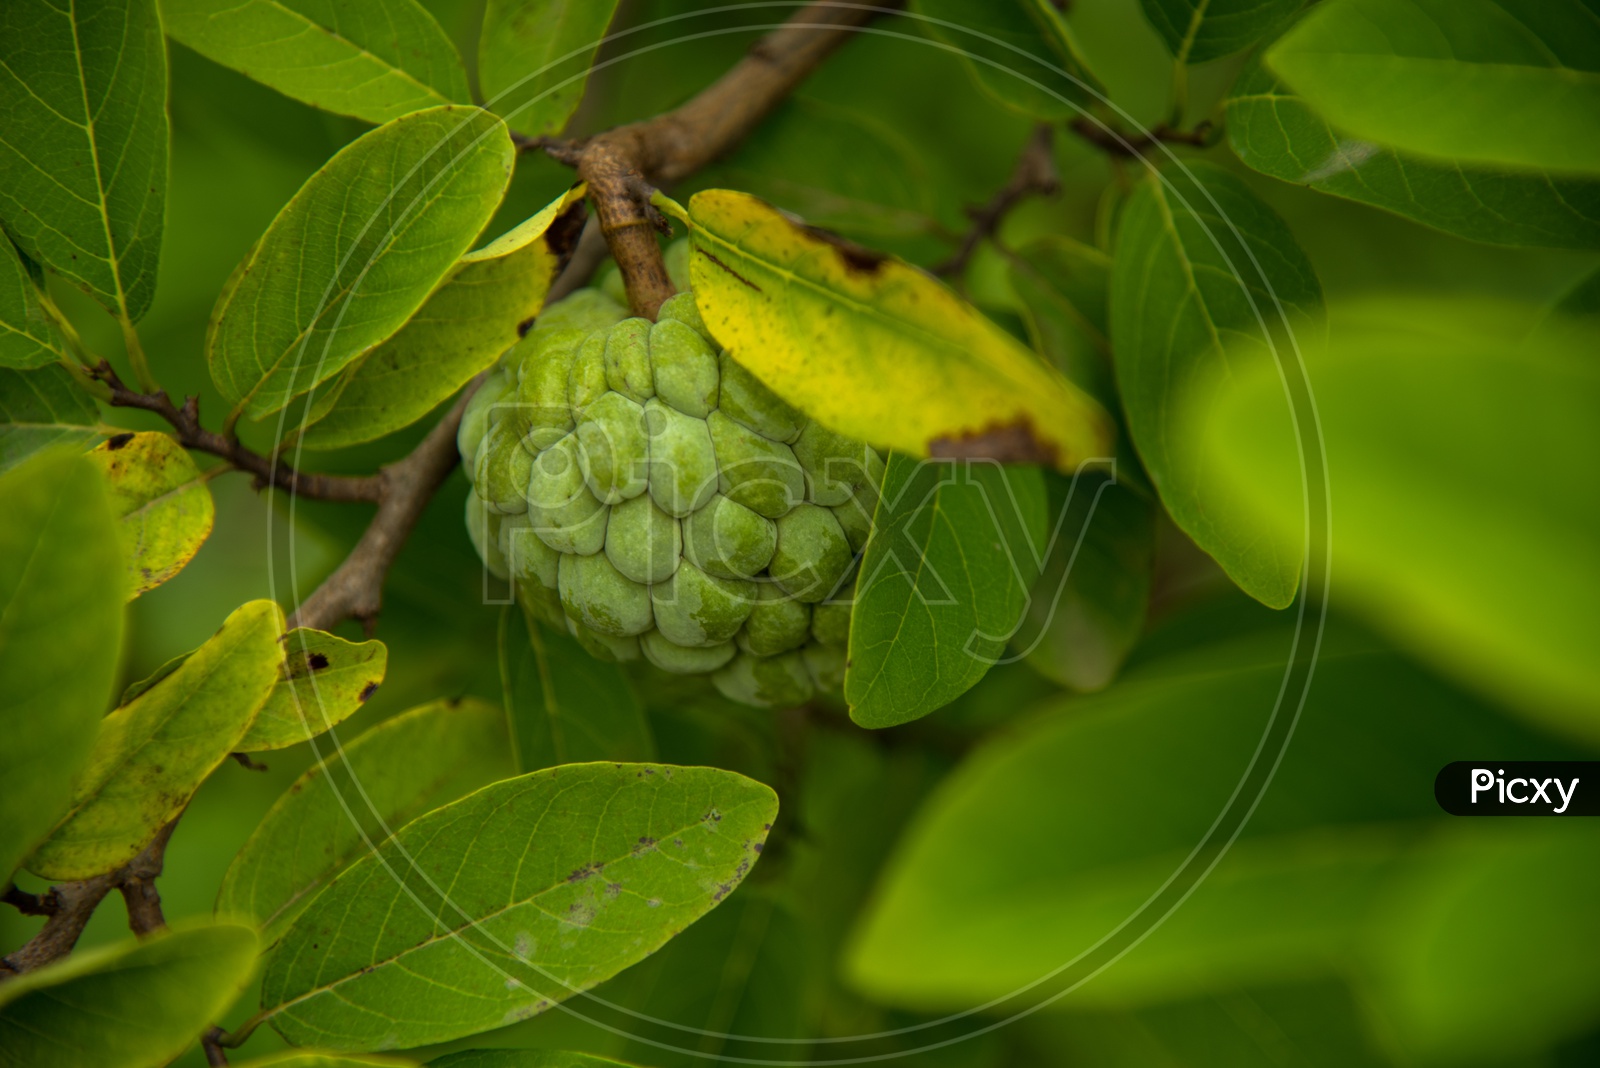 Fresh Green Custard Apples or Sugar Apples Or Seethaphal or Annona  Squamosa Linn   Fruit  Growing On Trees In a  Agricultural Farm